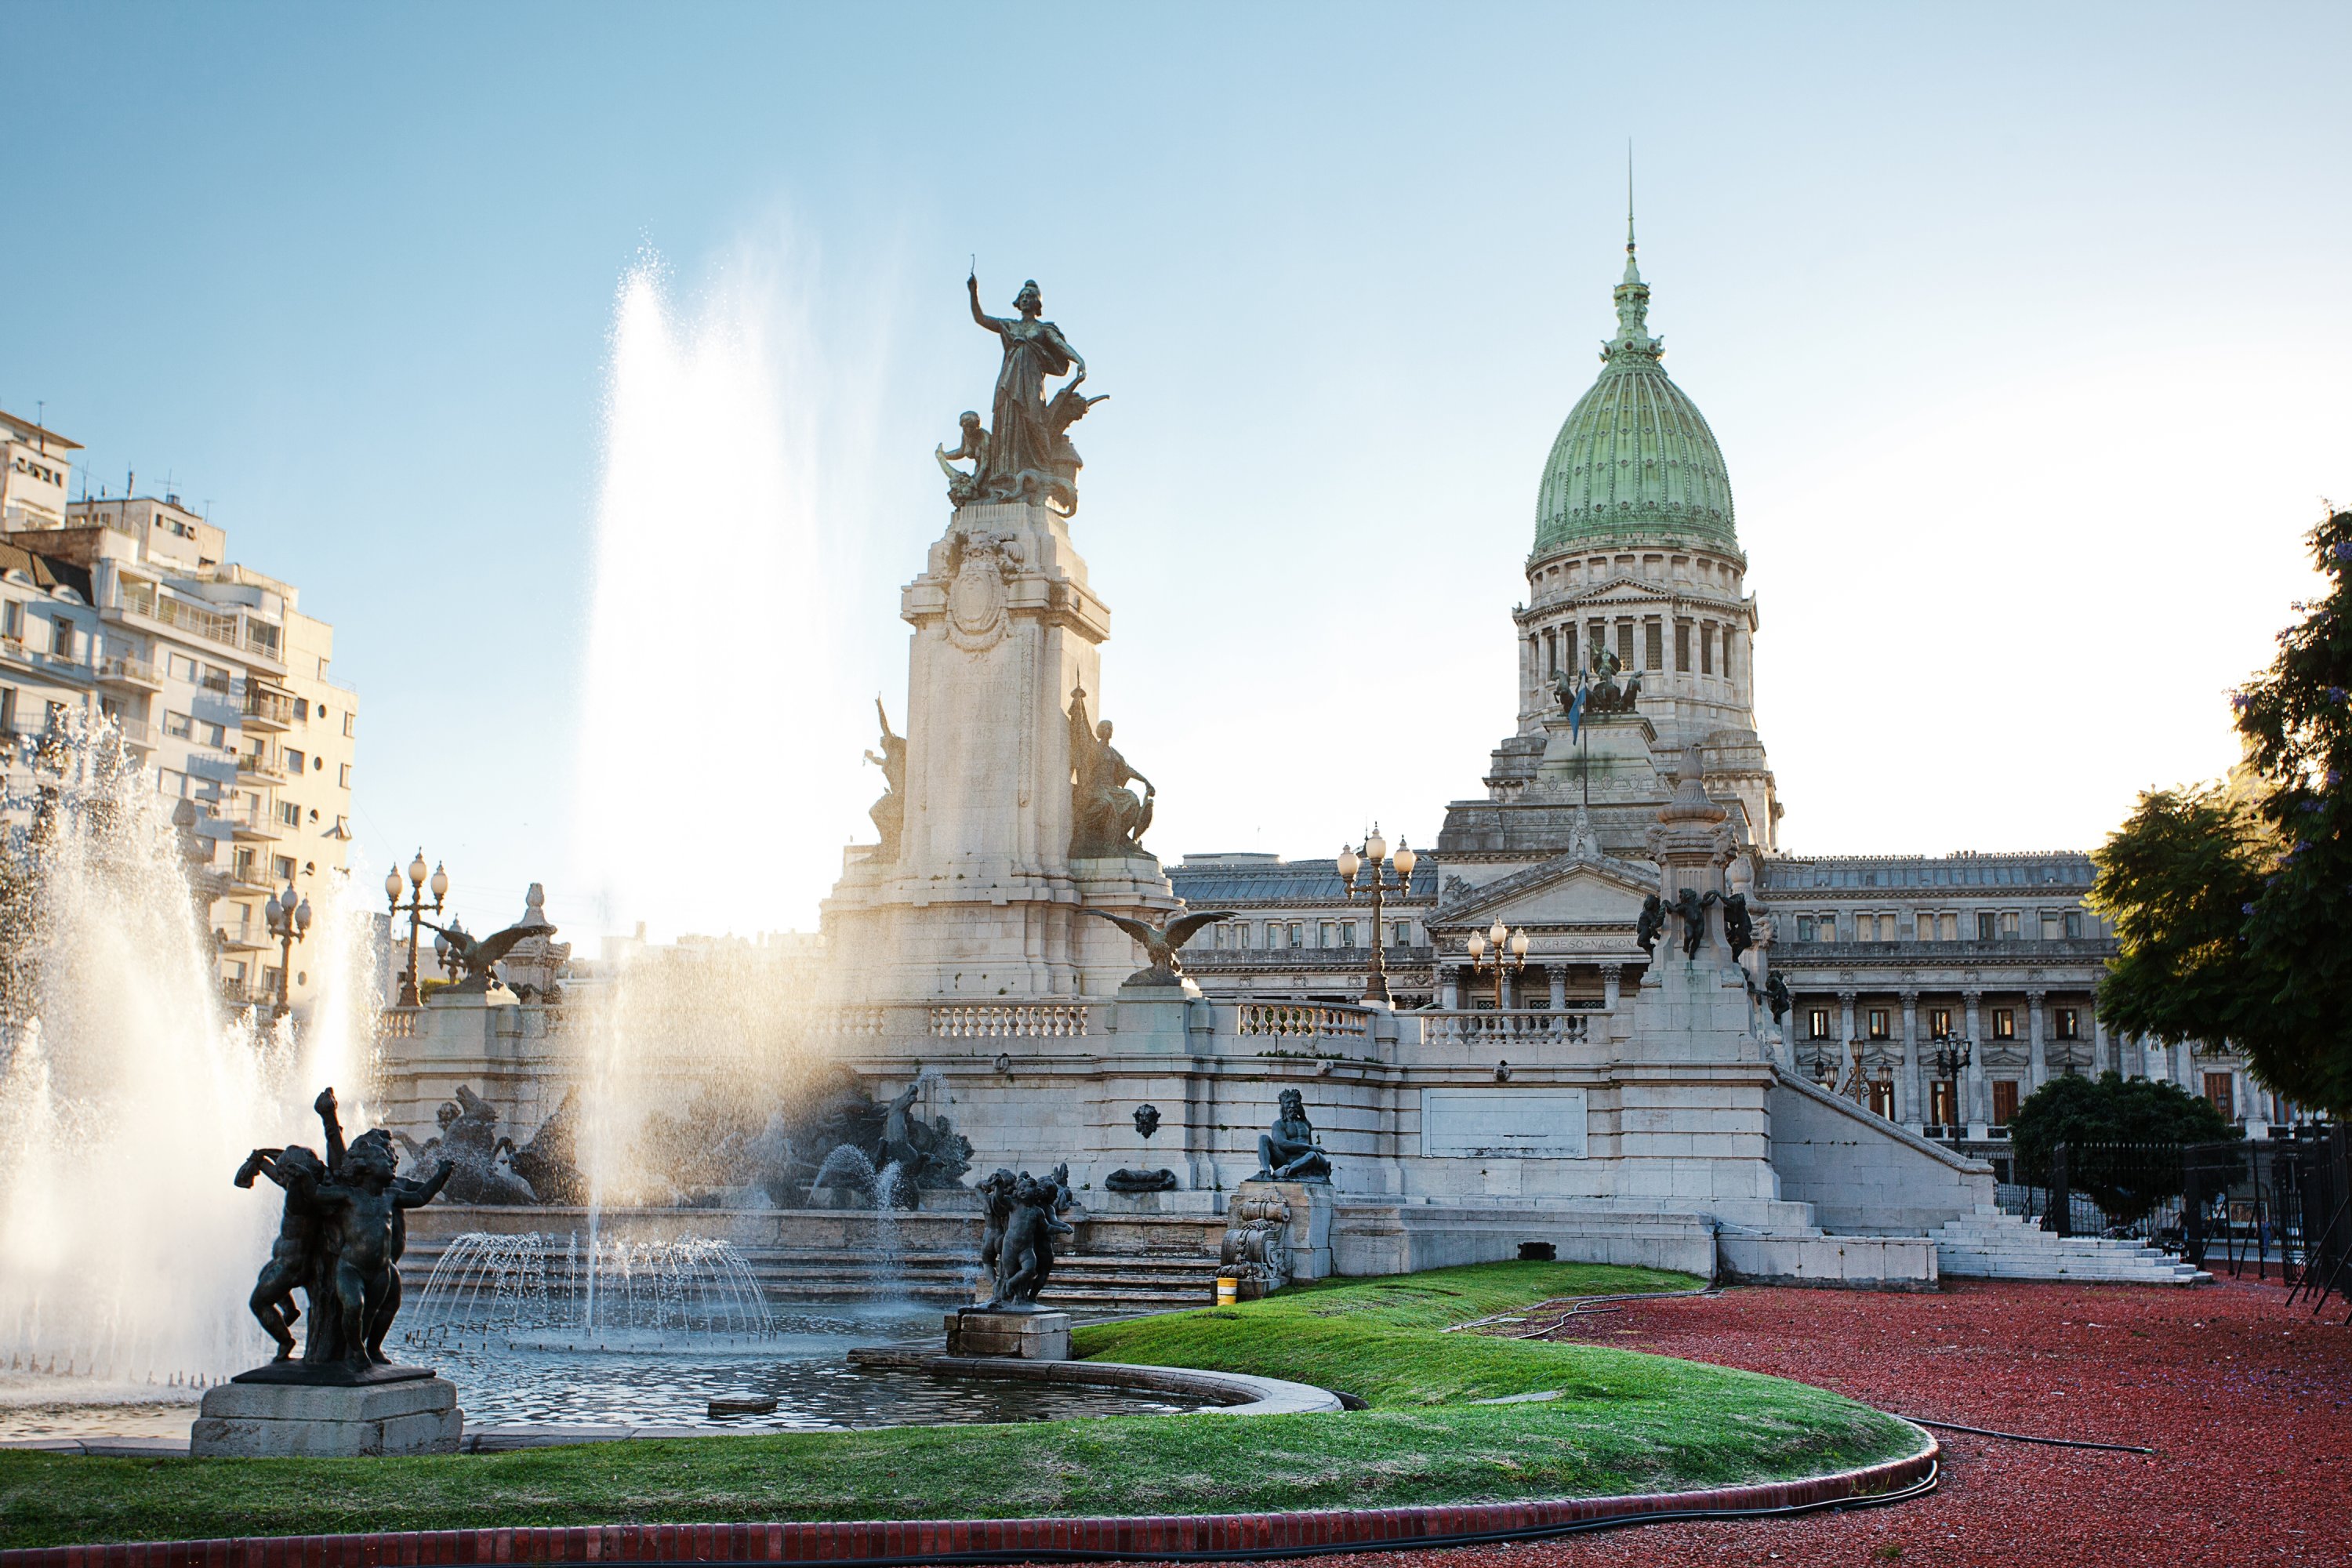 Building of Congress and fountain in Buenos Aires, Argentina. (Shutterstock Photo)